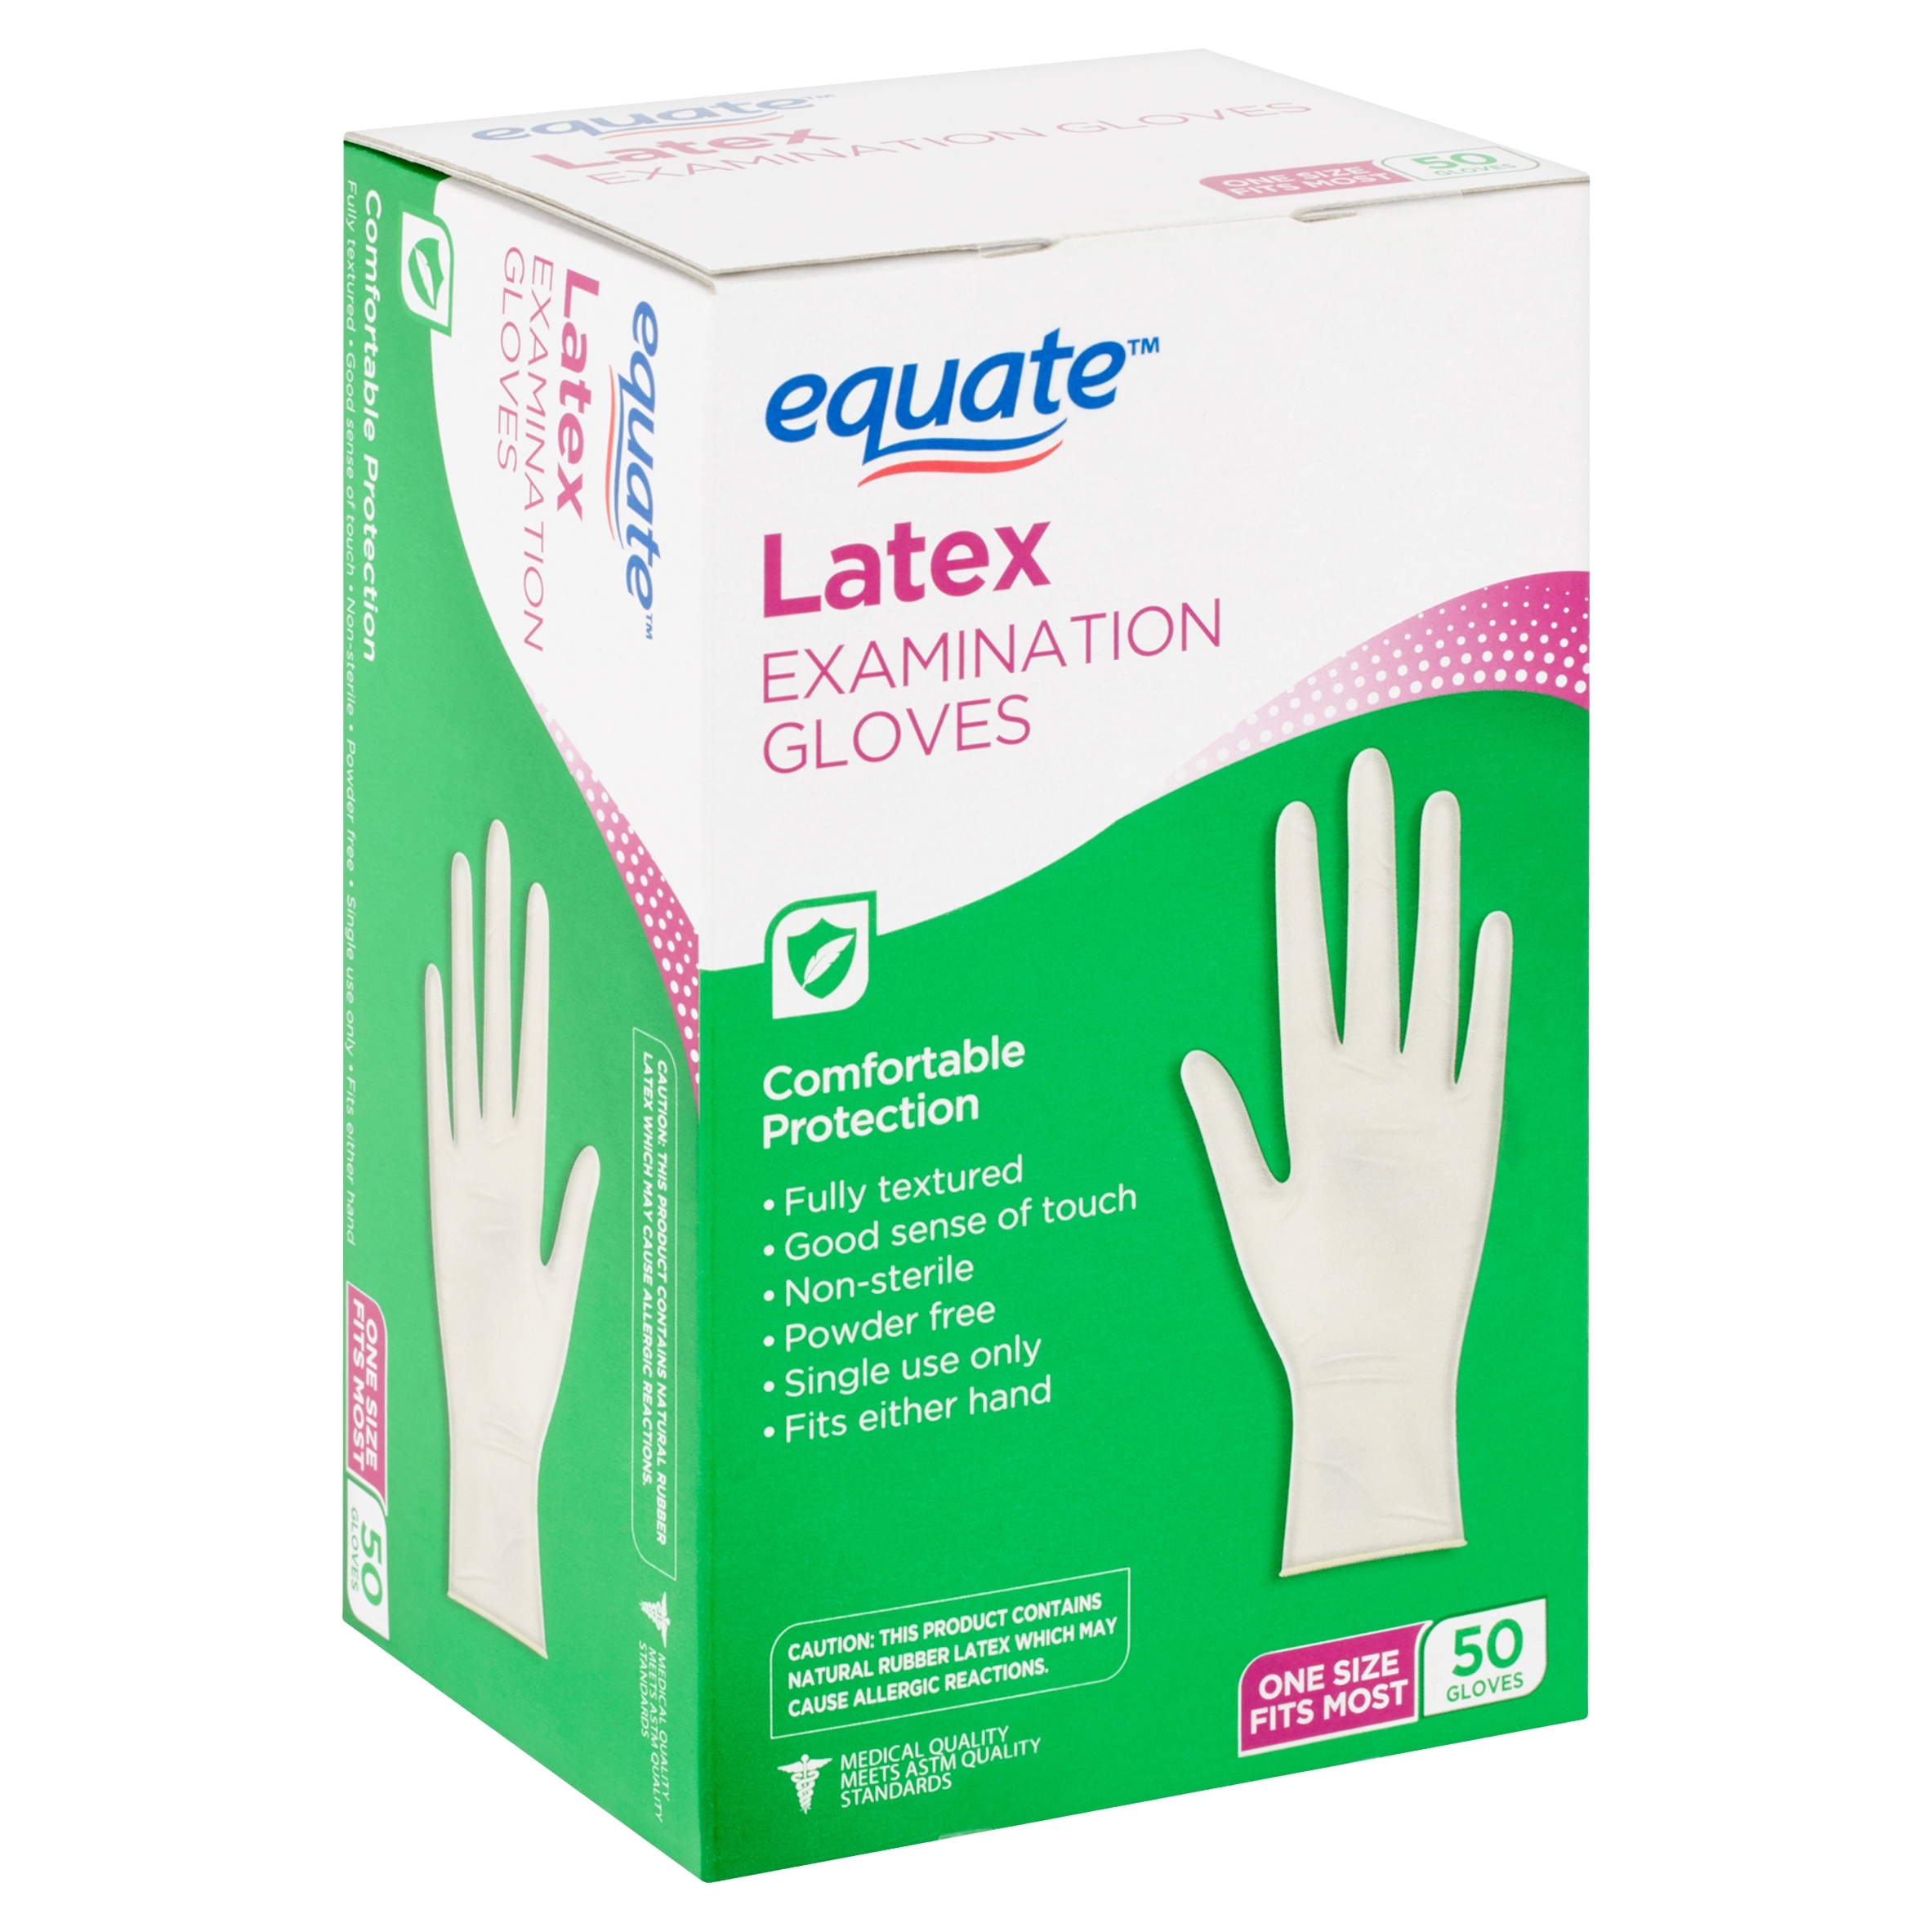 Equate Latex Examination Gloves, 50 Count - image 1 of 10